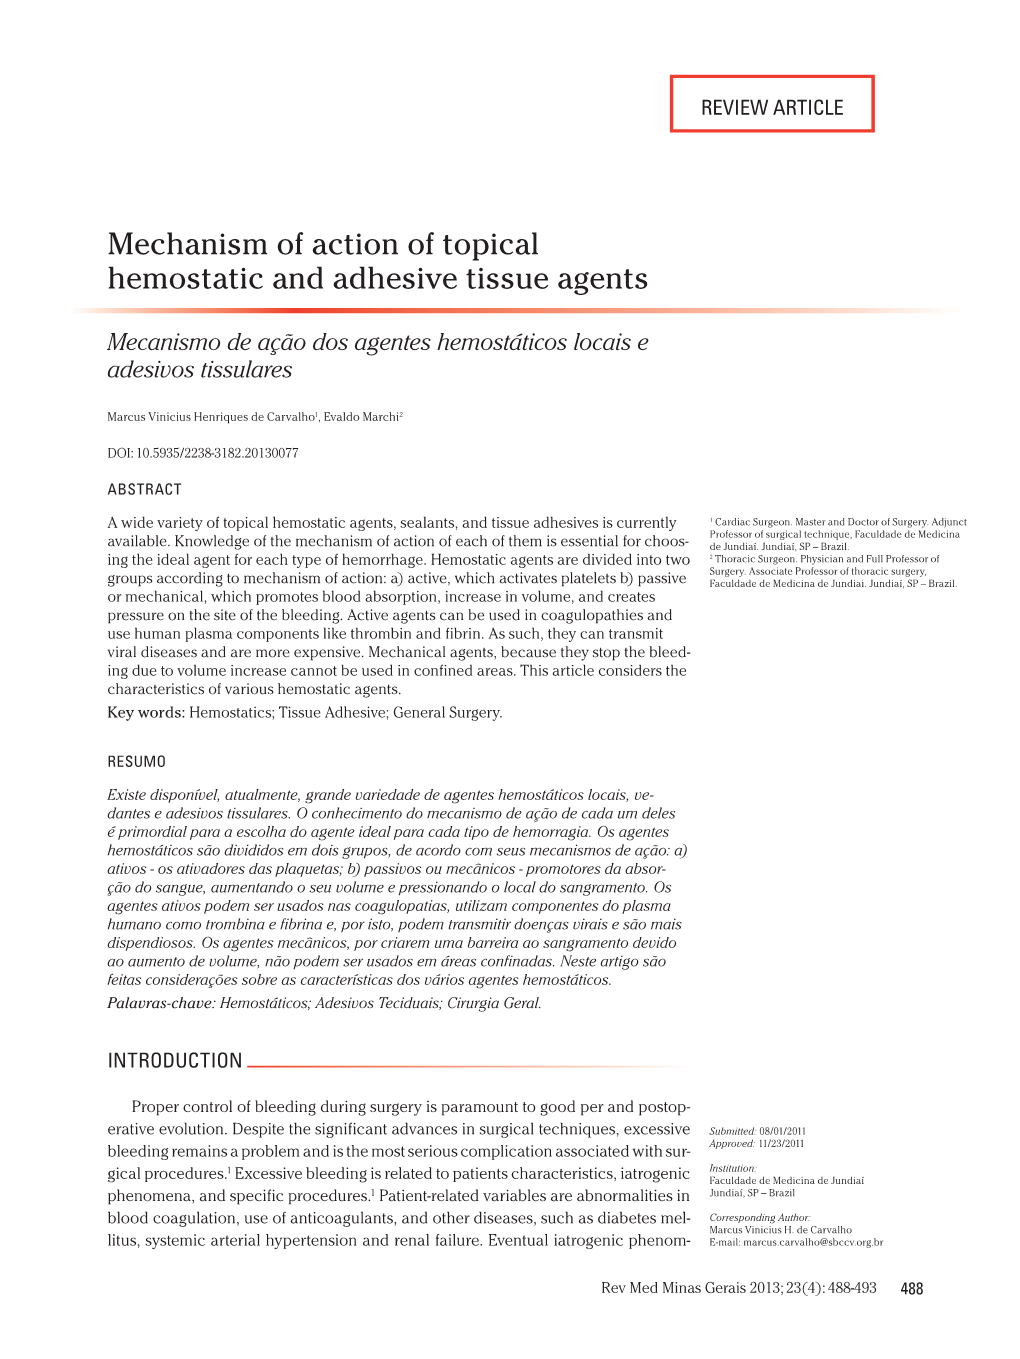 Mechanism of Action of Topical Hemostatic and Adhesive Tissue Agents